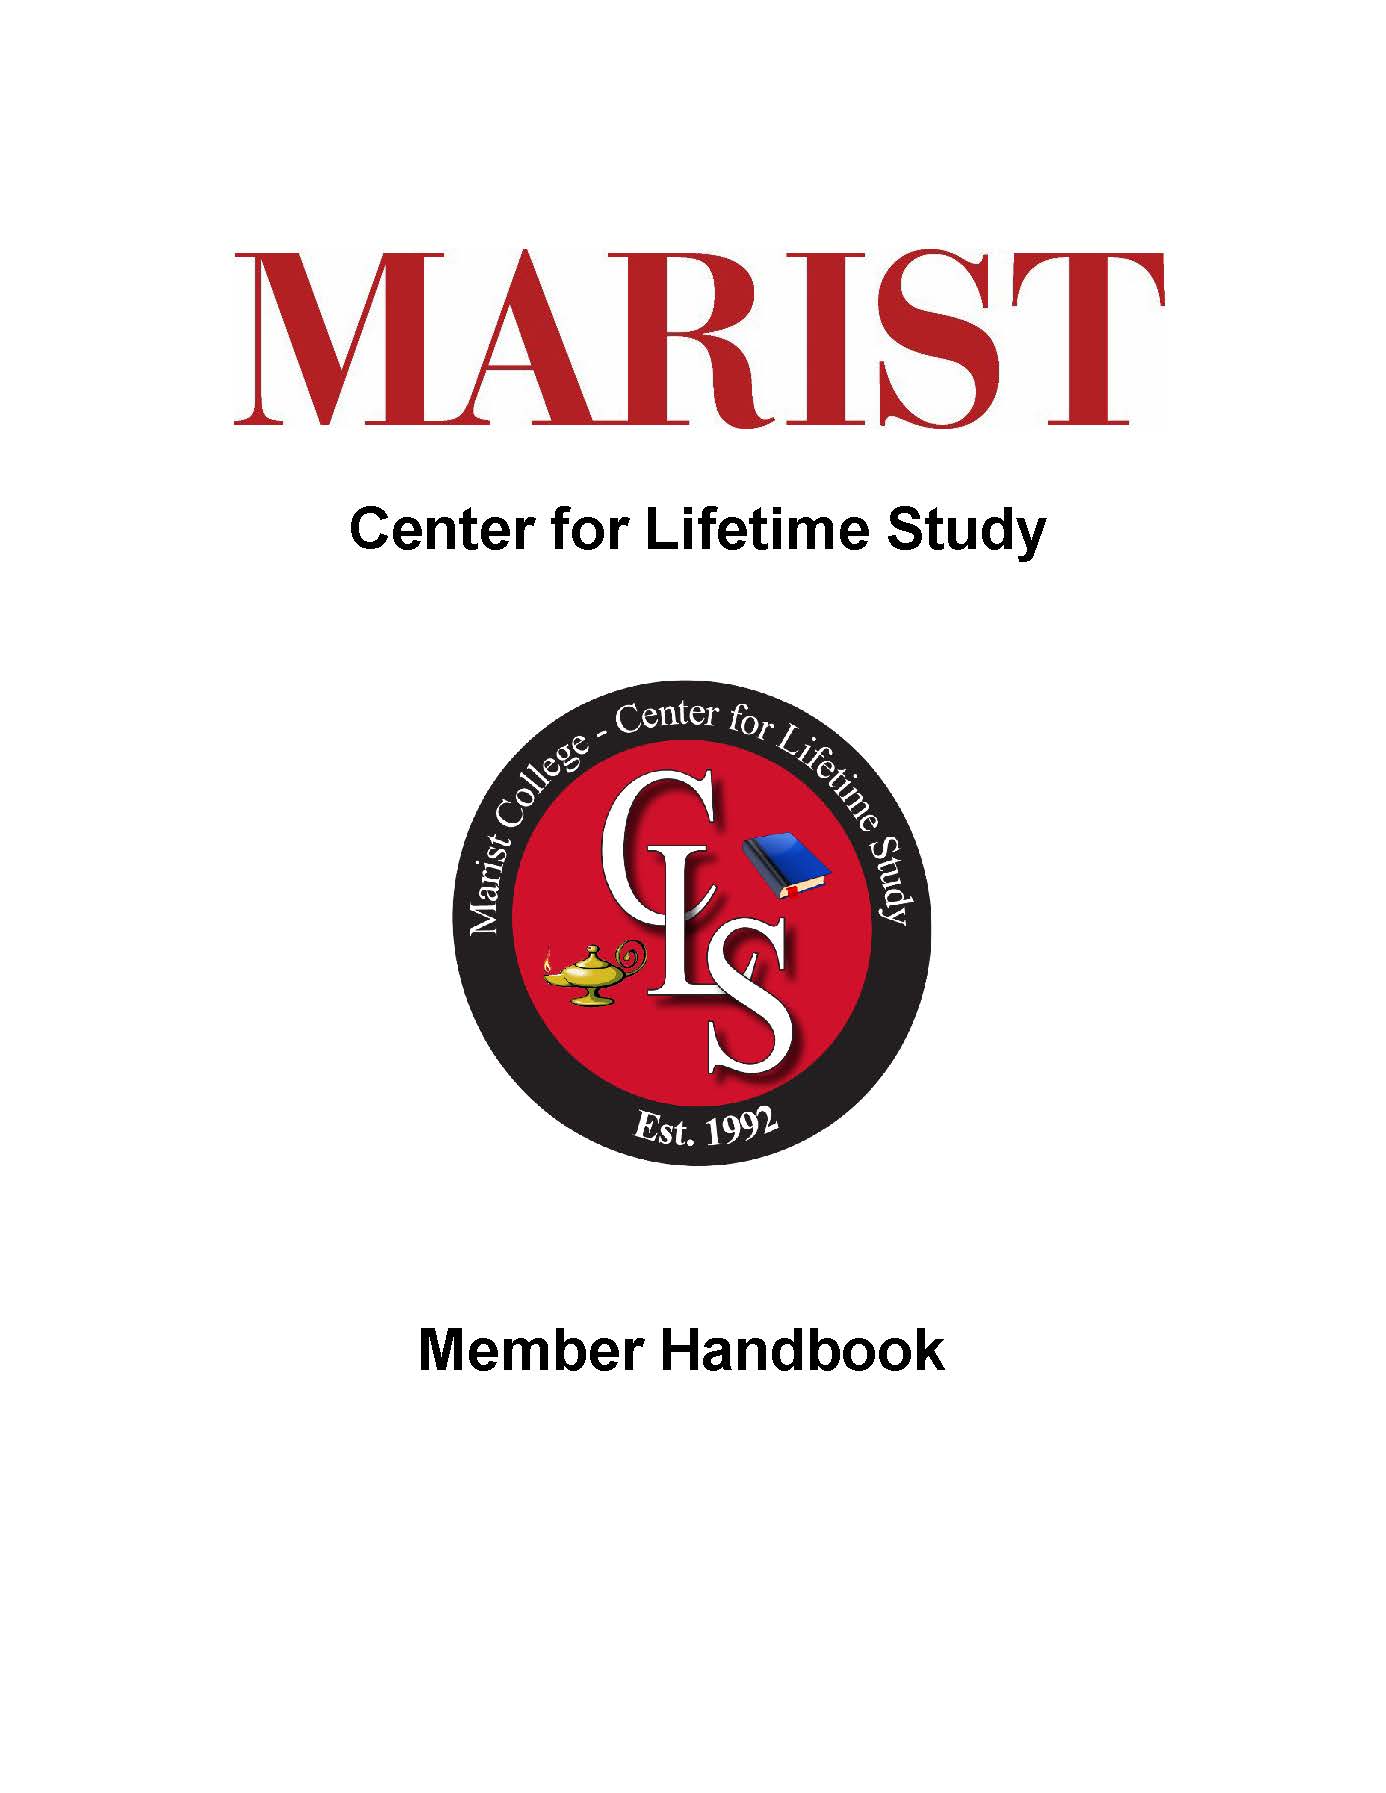 image of the cover page for the cls handbook